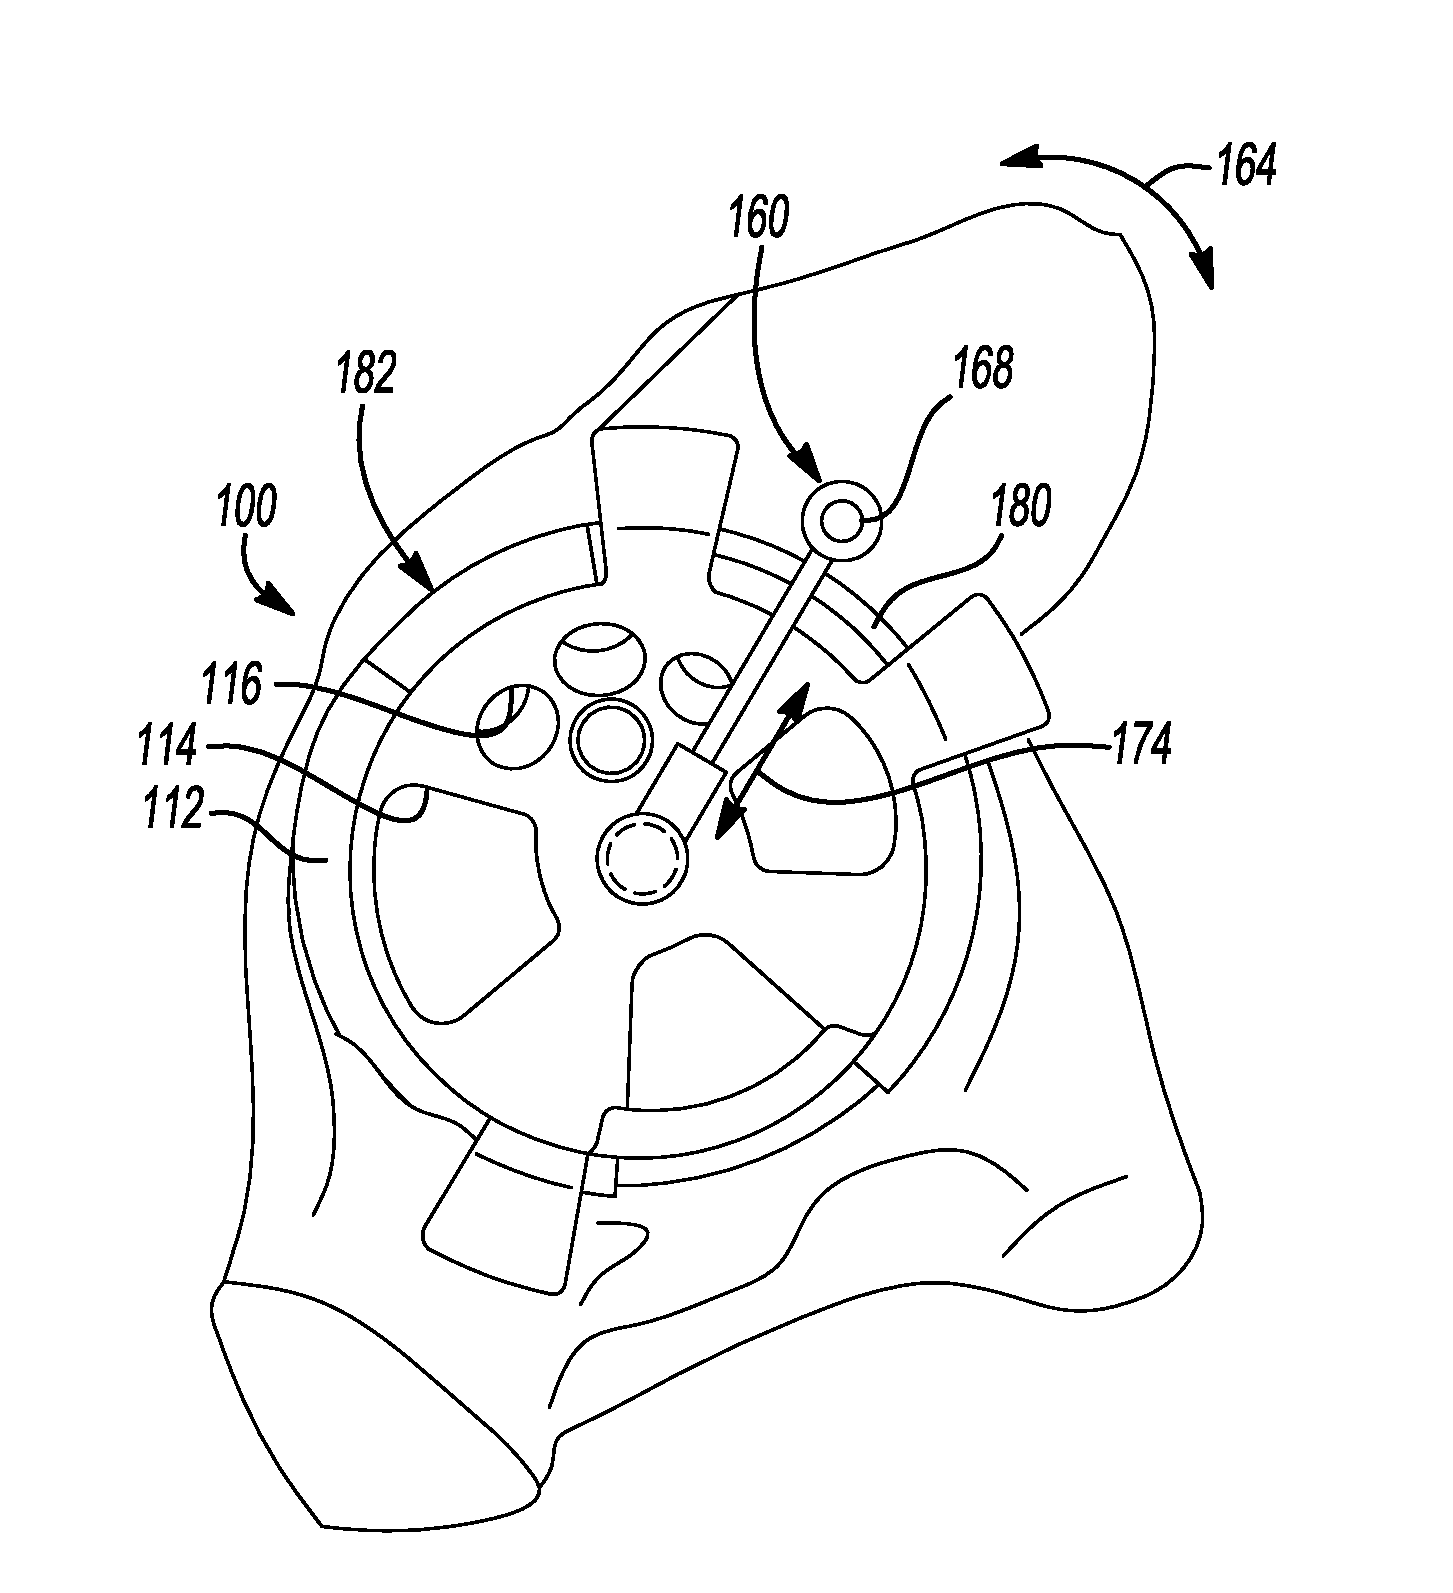 Universal Acetabular Guide And Associated Hardware